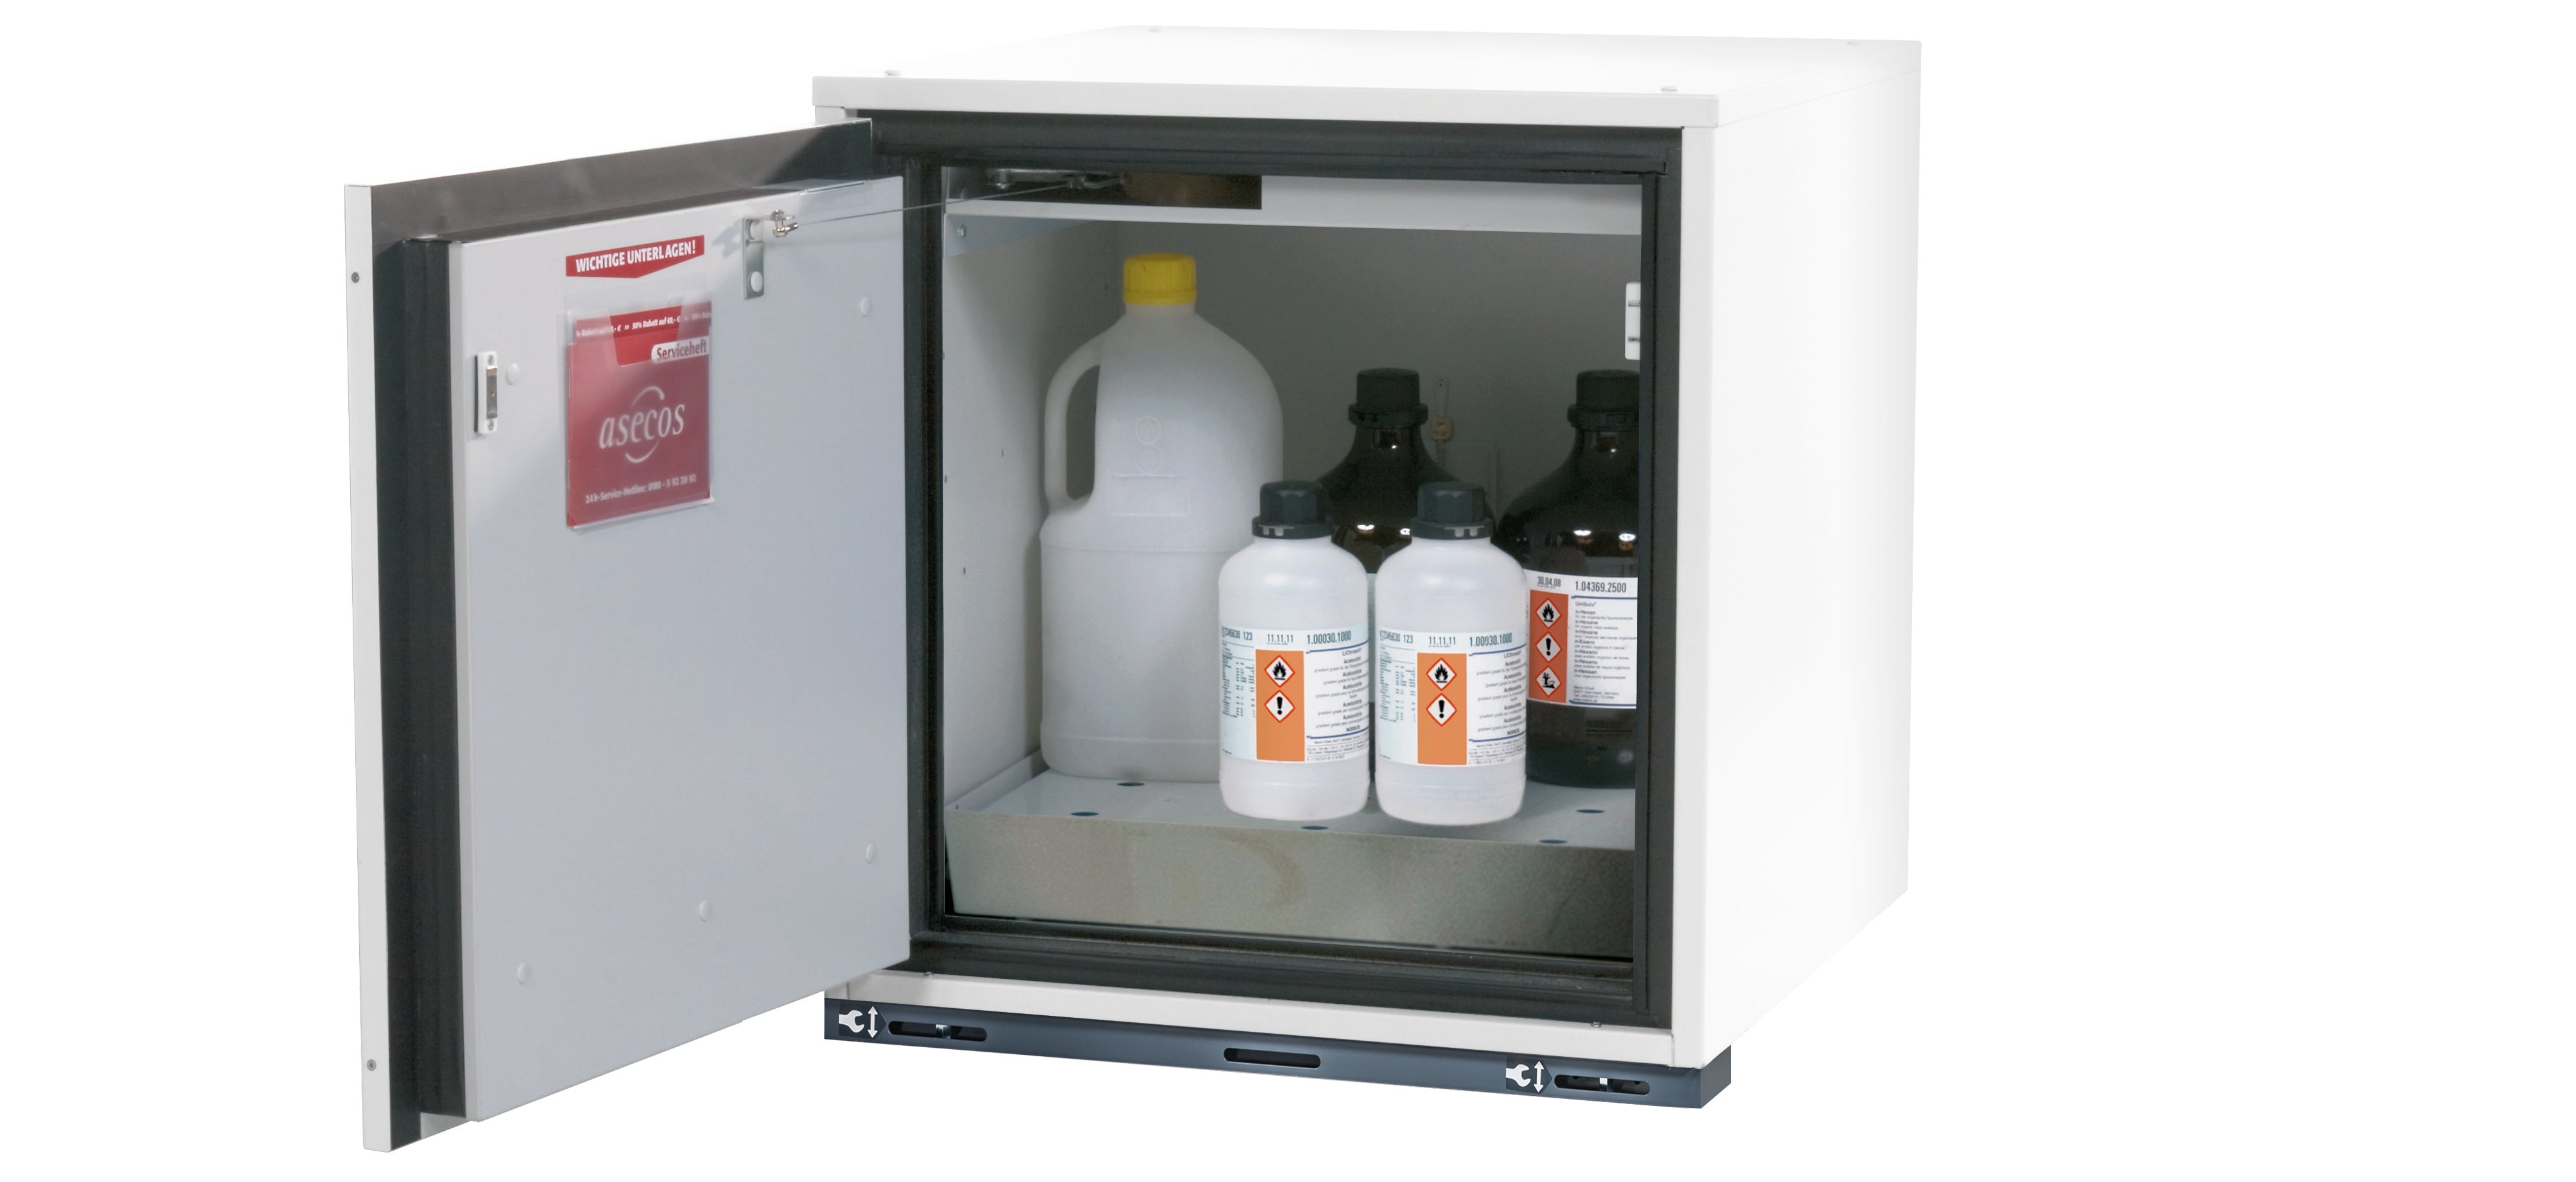 Type 90 safety base cabinet UB-T-90 model UB90.060.059.UL.T in laboratory white (similar to RAL 9016) with 1x perforated sheet metal insert standard (stainless steel 1.4016)